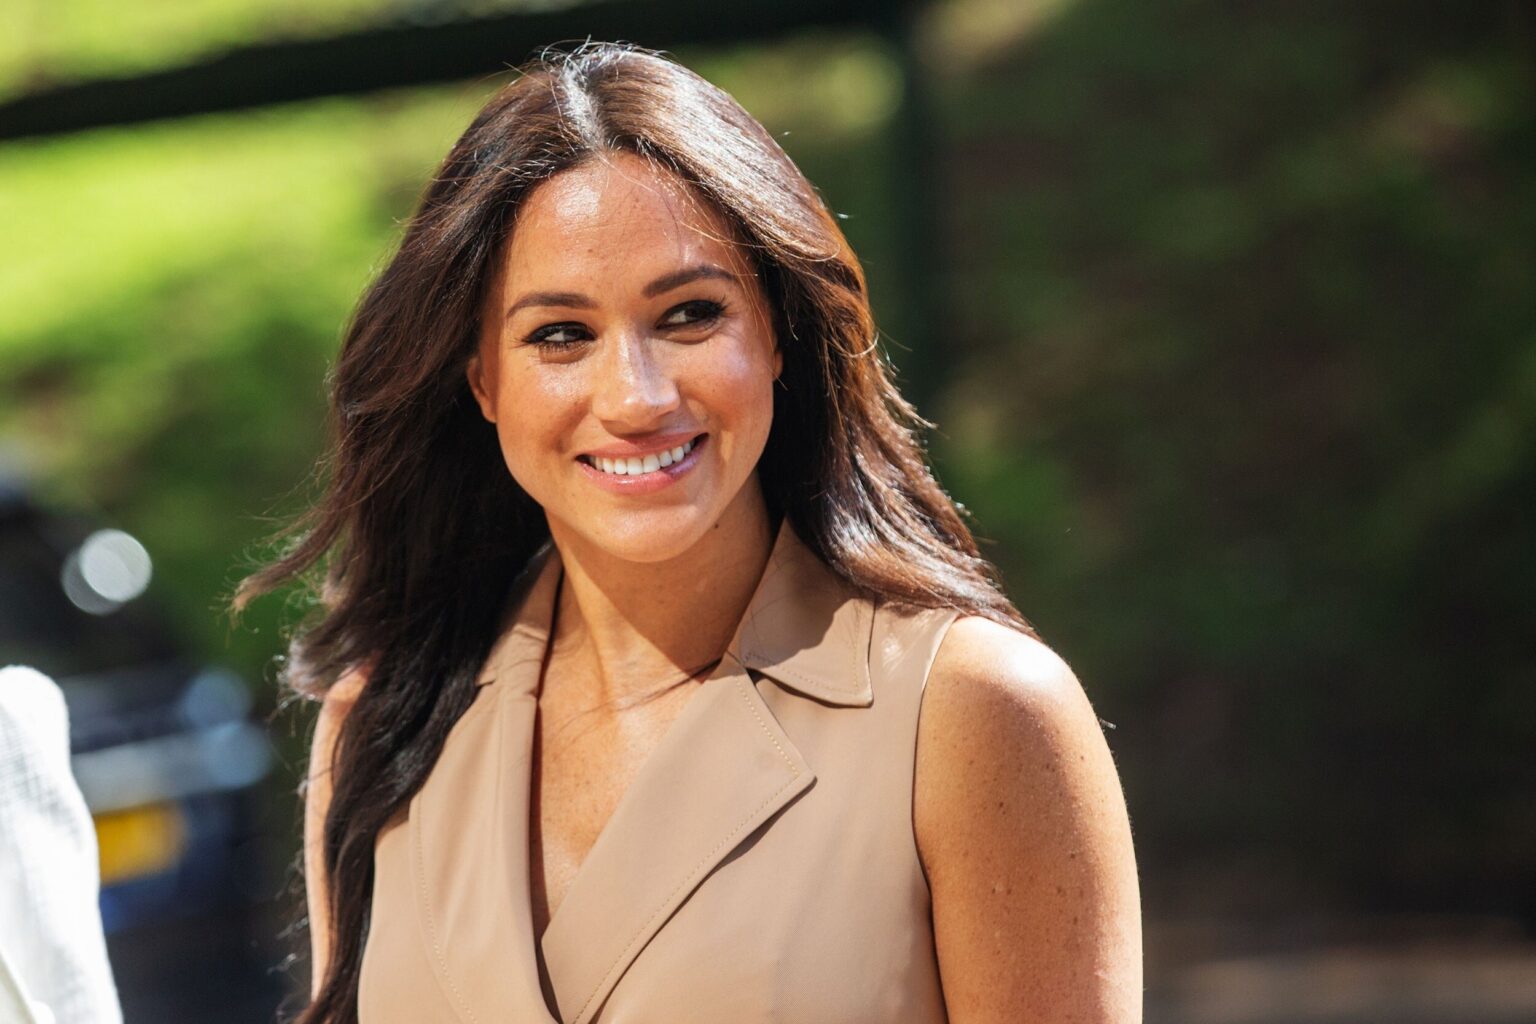 Meghan Markle doesn't have a personal Instagram or any social media accounts. She has finally explained why.